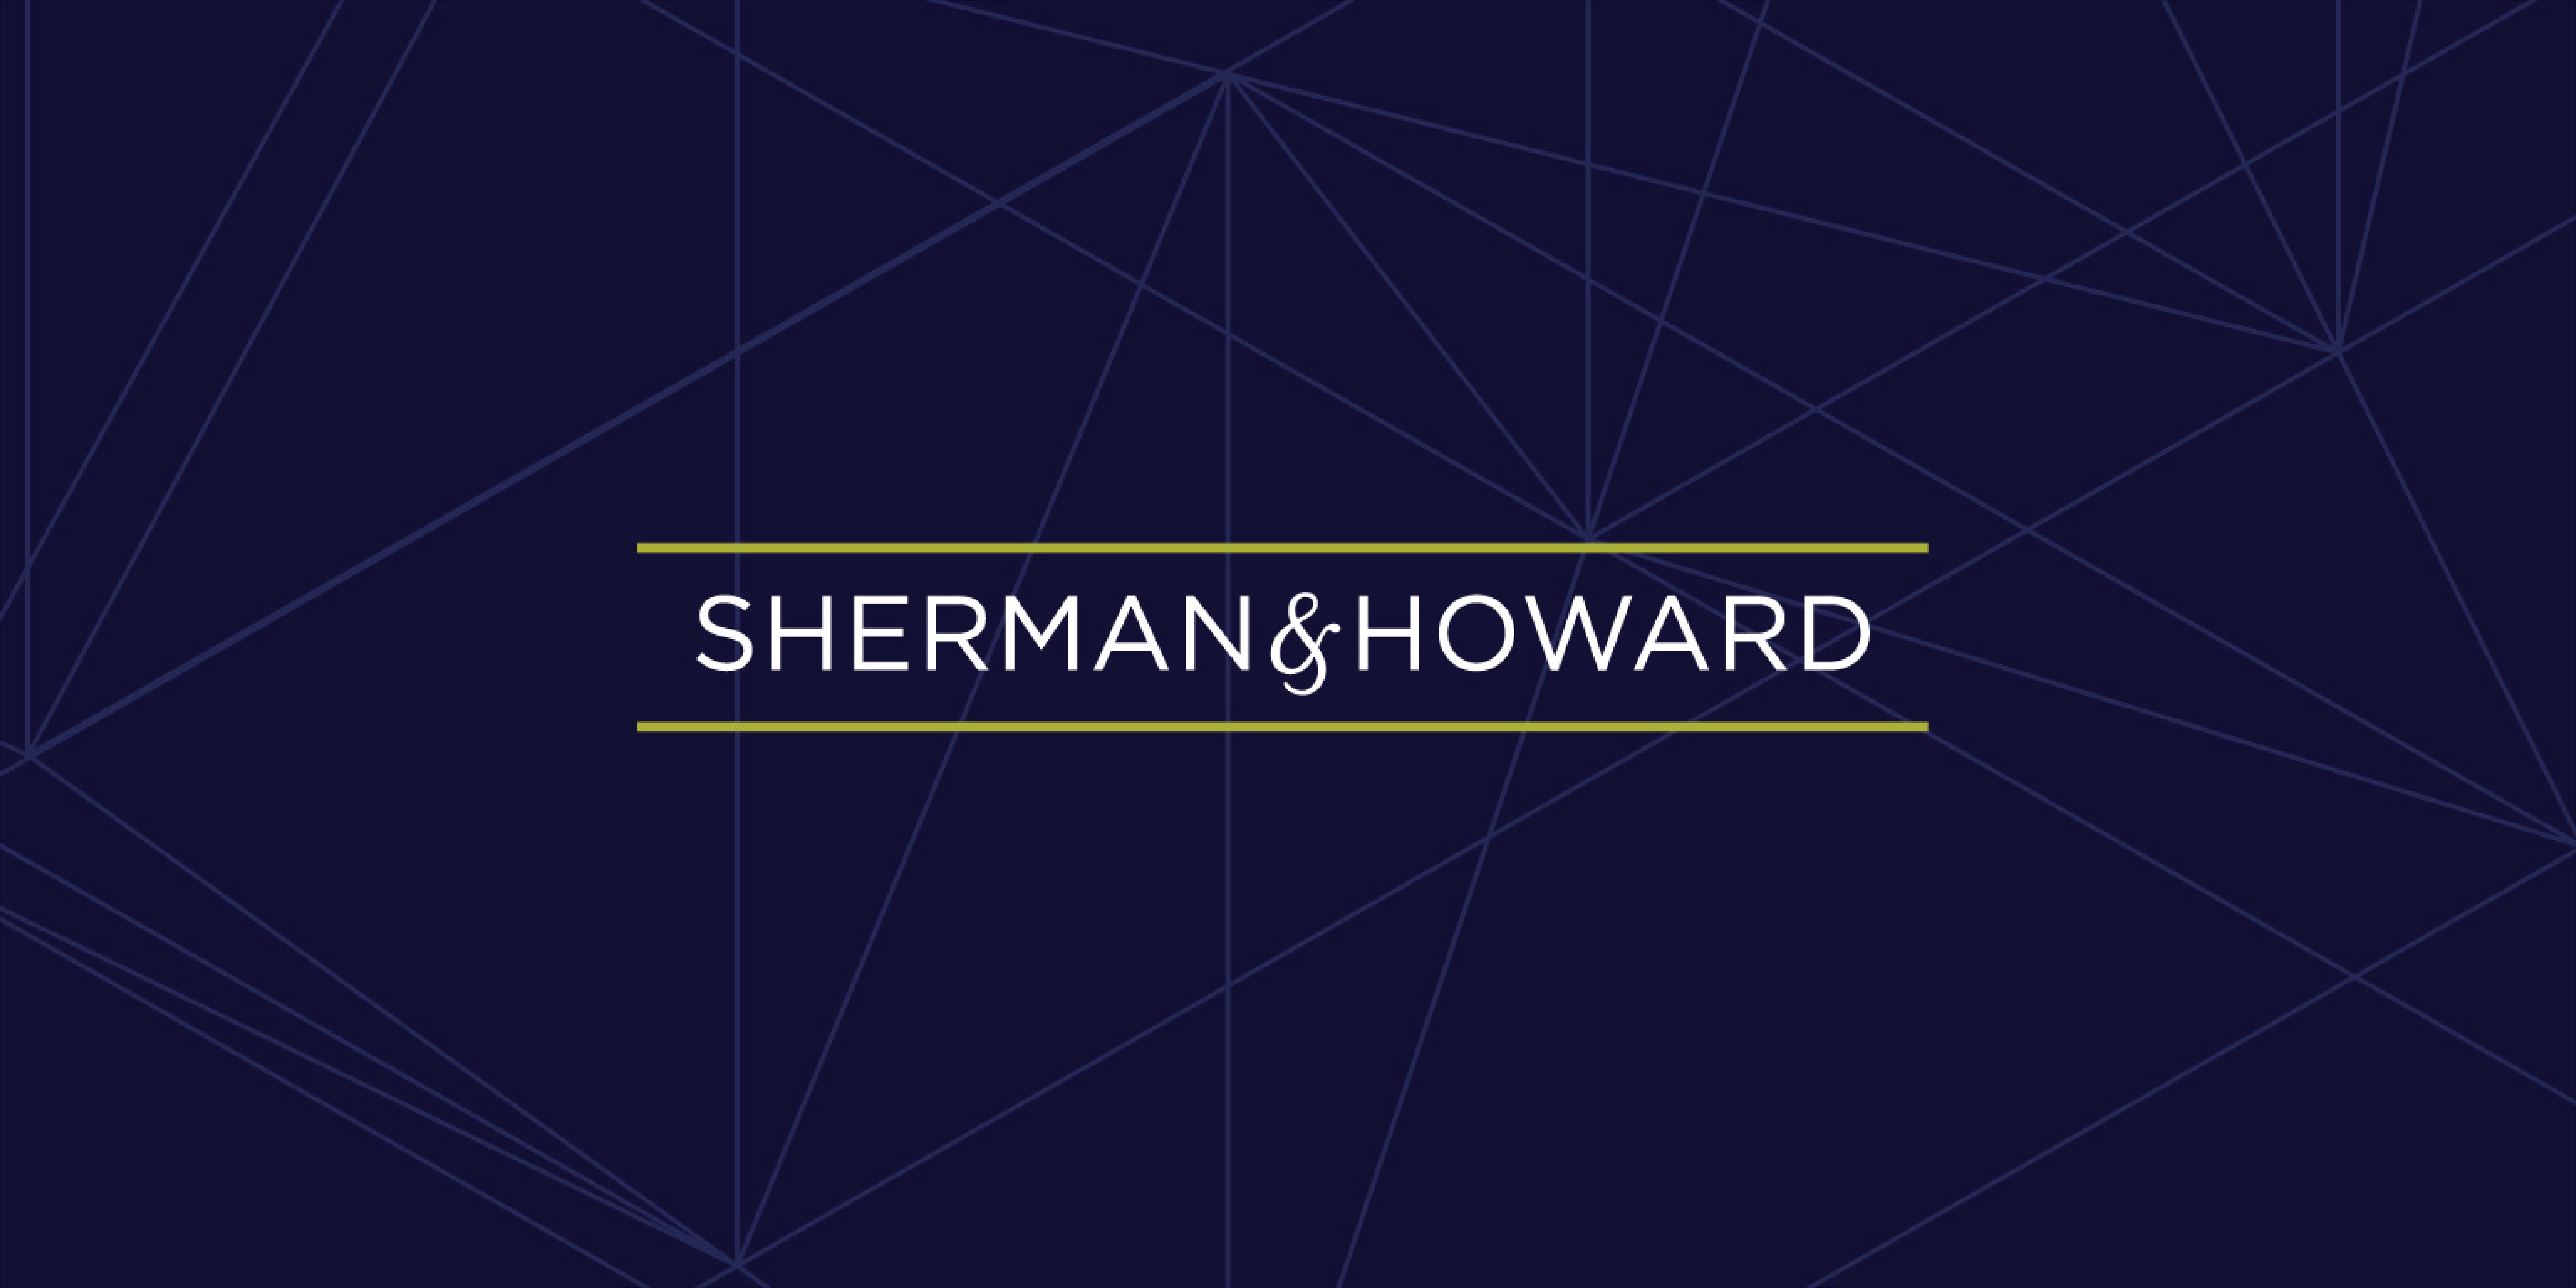 Sherman & Howard's 30 Arizona lawyers serve a broad range of clients including individuals, privately held businesses, multi-national corporations and government entities. Learn more about why this law firm chose Greater Phoenix.